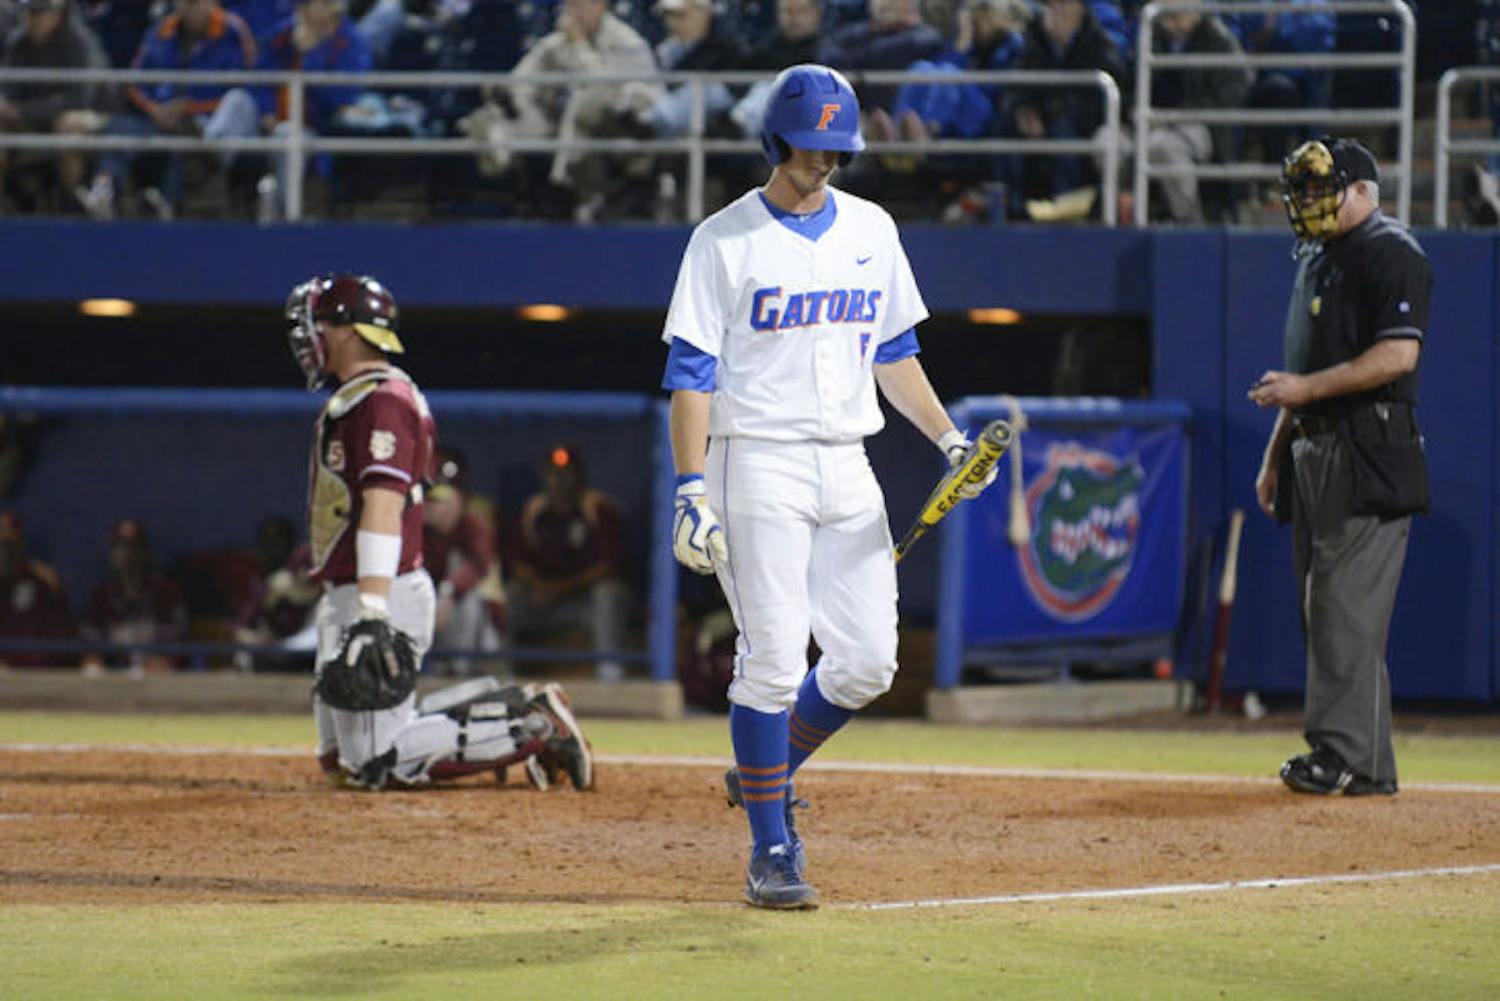 Zack Powers walks back to the dugout after striking out during Florida’s 4-1 loss to Florida State on March 12, 2013 at McKethan Stadium.&nbsp;